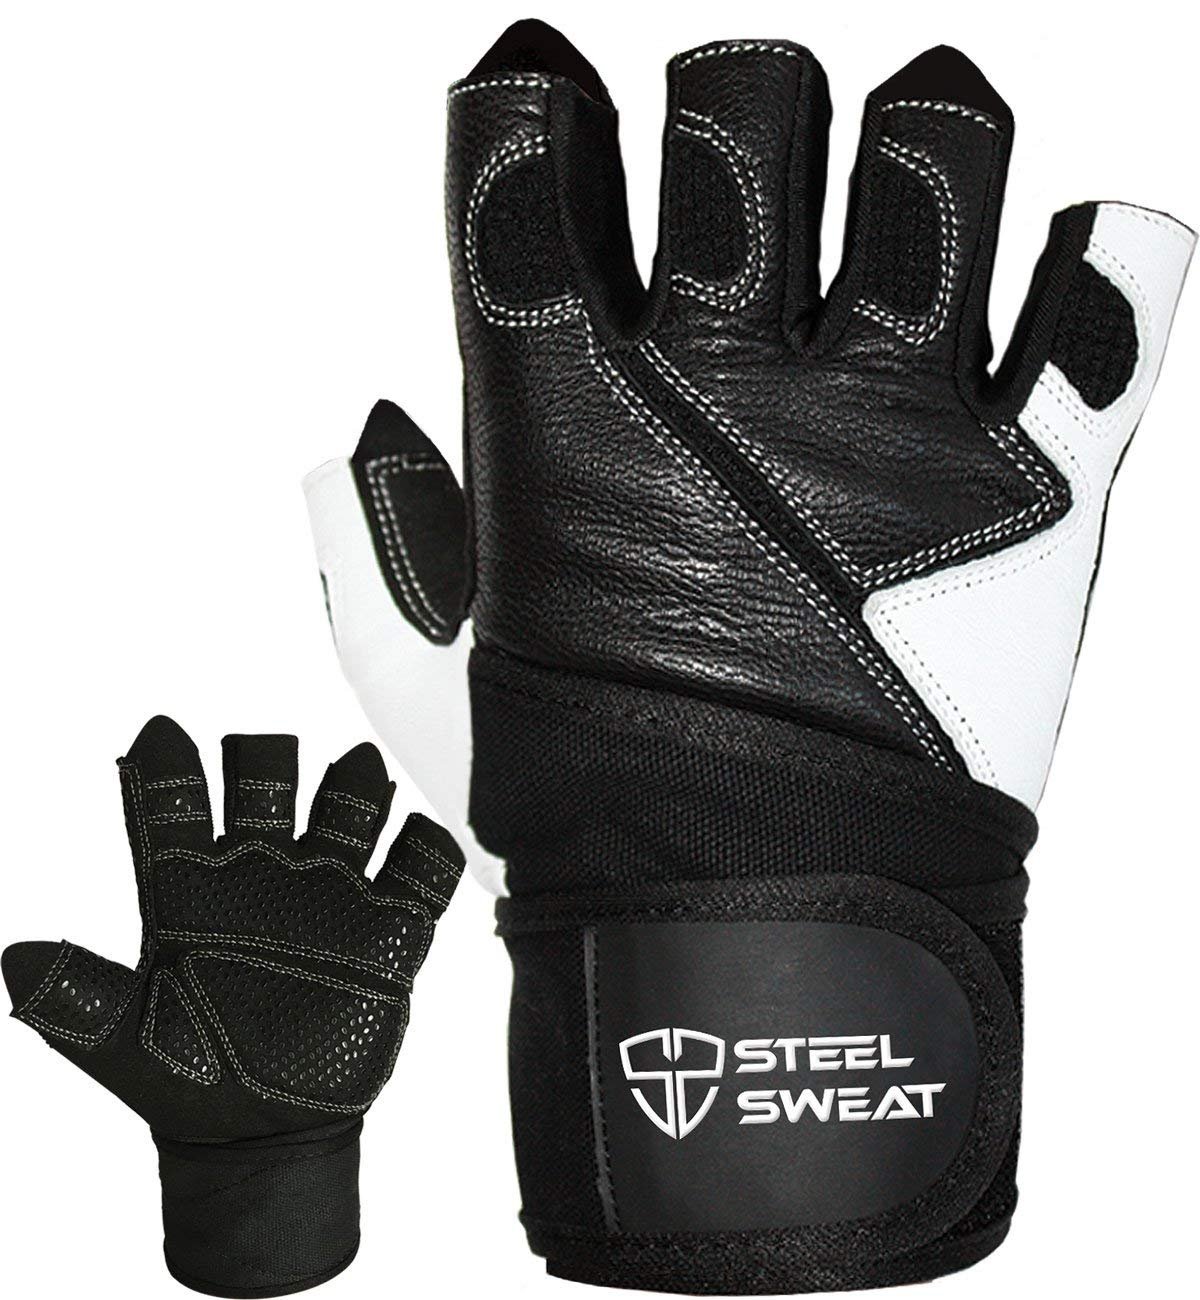 Steel Sweat Weight Lifting Gloves